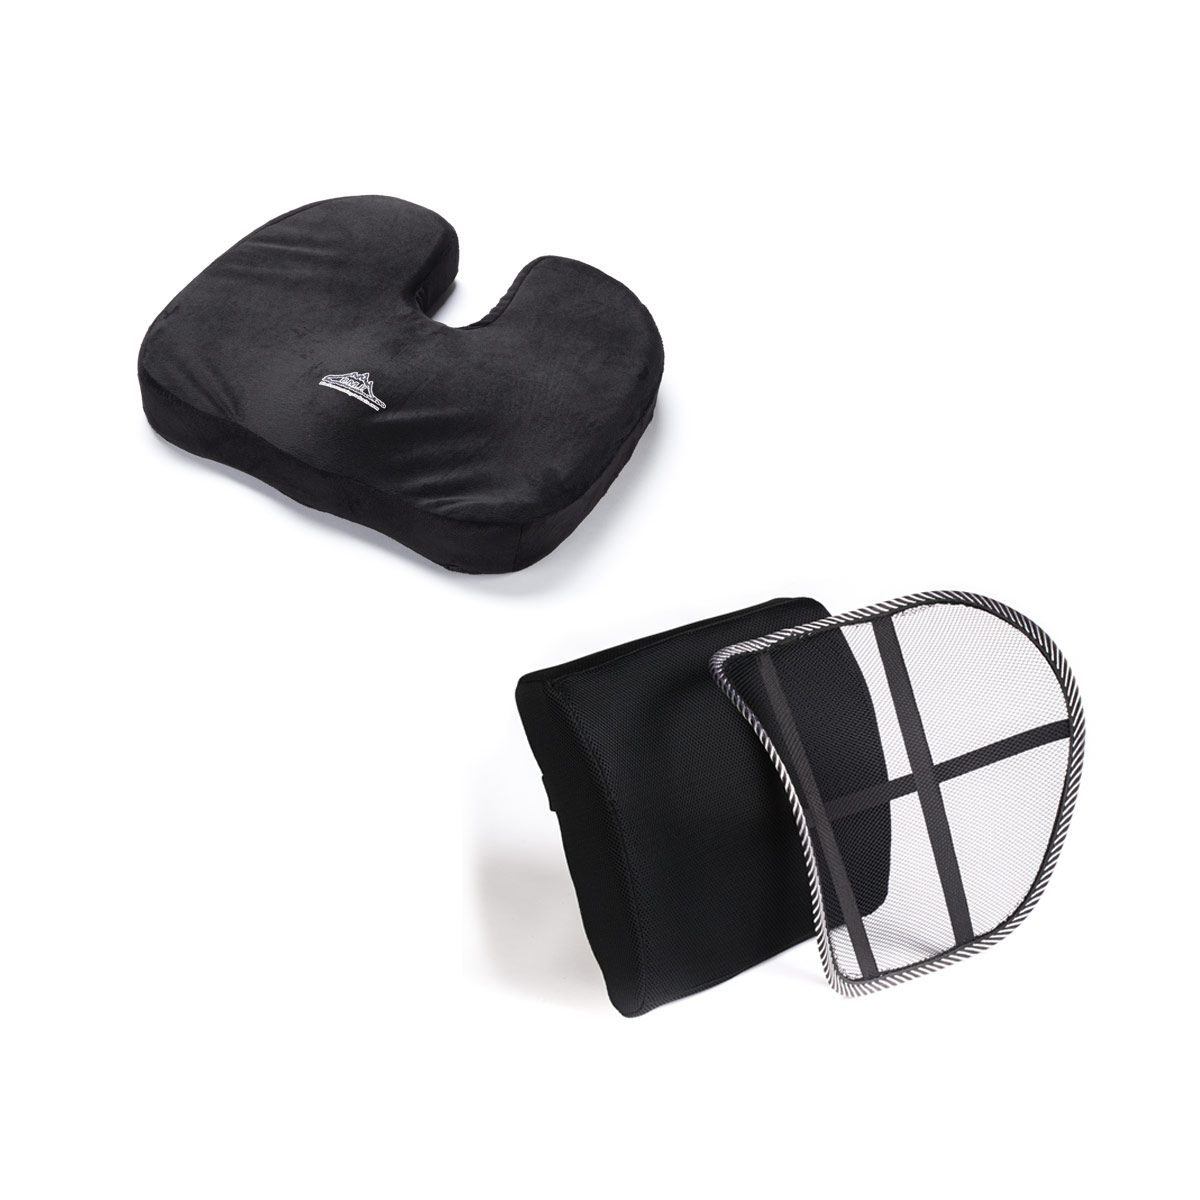 Orthopedic Memory Foam Seat Cushion and Lumbar Support Kit - Black Mountain  Products